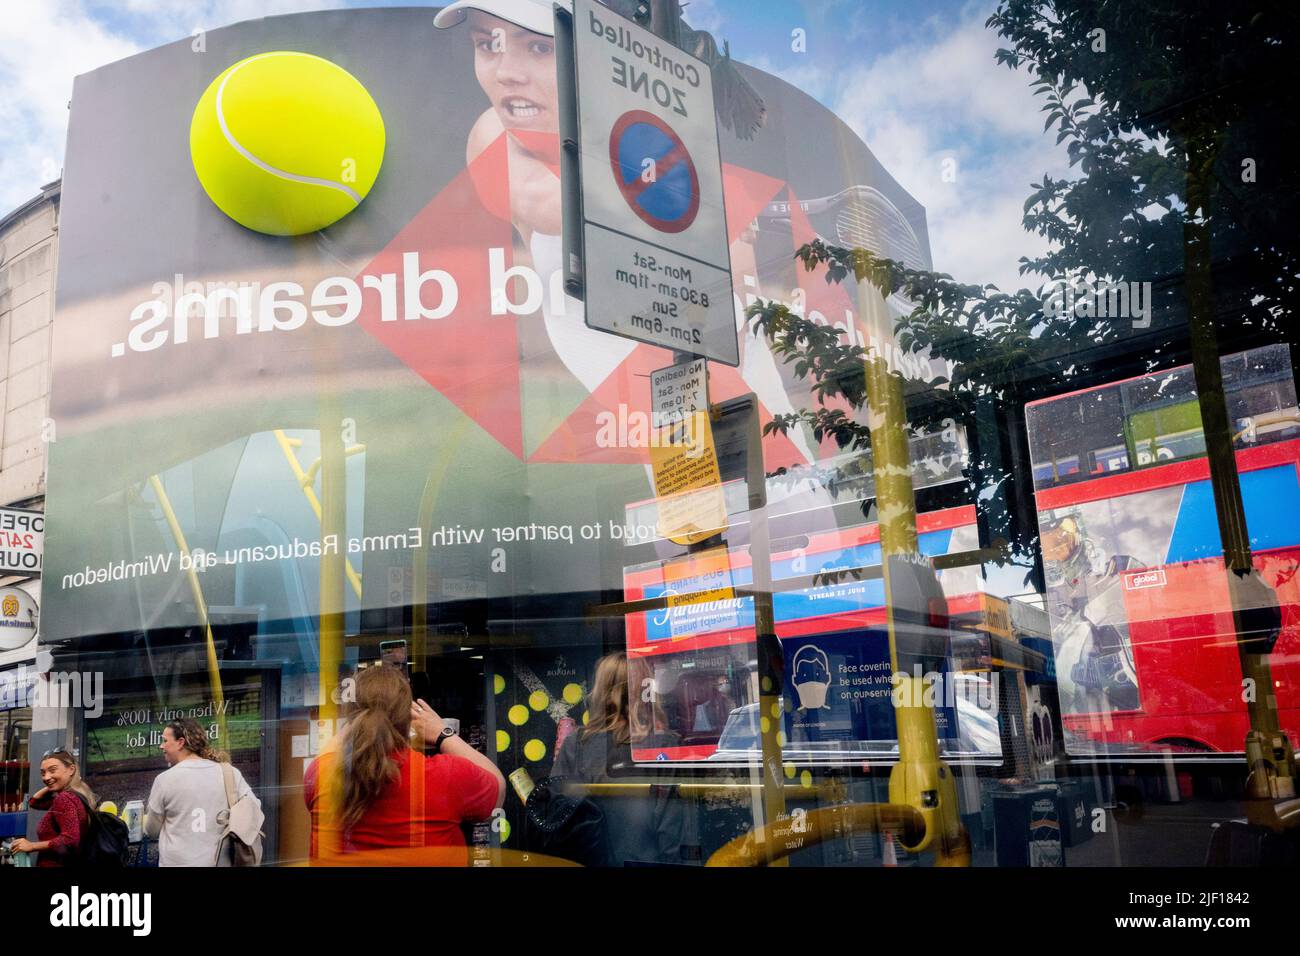 Reflected in the window of a bus, British tennis player, Emma Raducanu appears on a giant billboard in Wimbledon town centre, on the first day of competition during the Wimbledon Lawn Tennis Association championships, on 27th June 2022, in London, England. Stock Photo